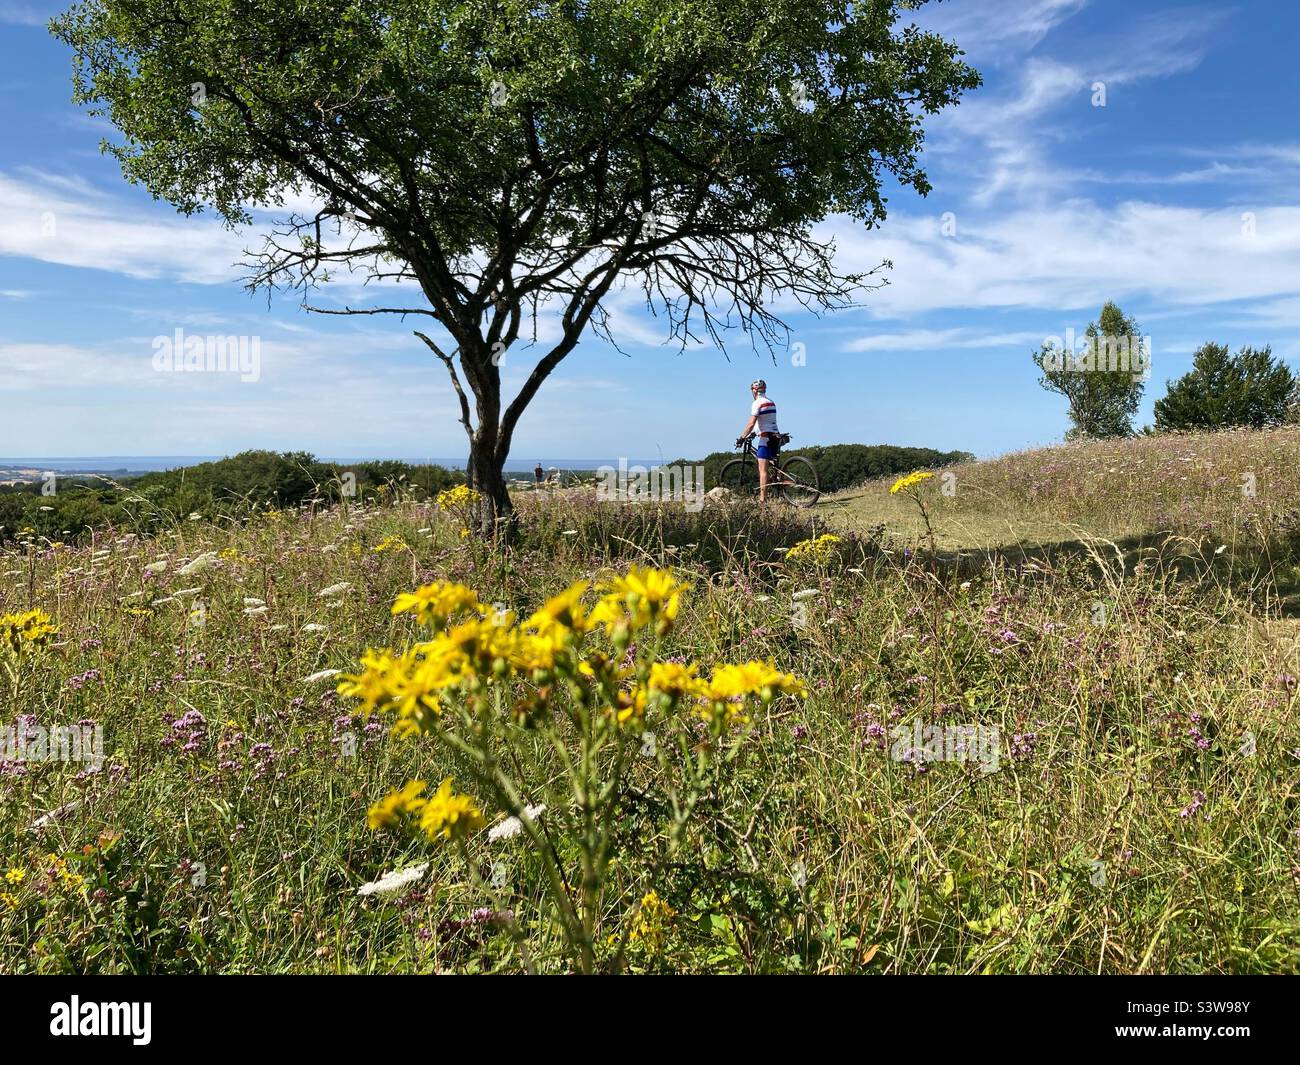 Tree Man on Mountainbike and flower on a meadow in Mons Klint Park, aborrebjerg, Denmark Stock Photo